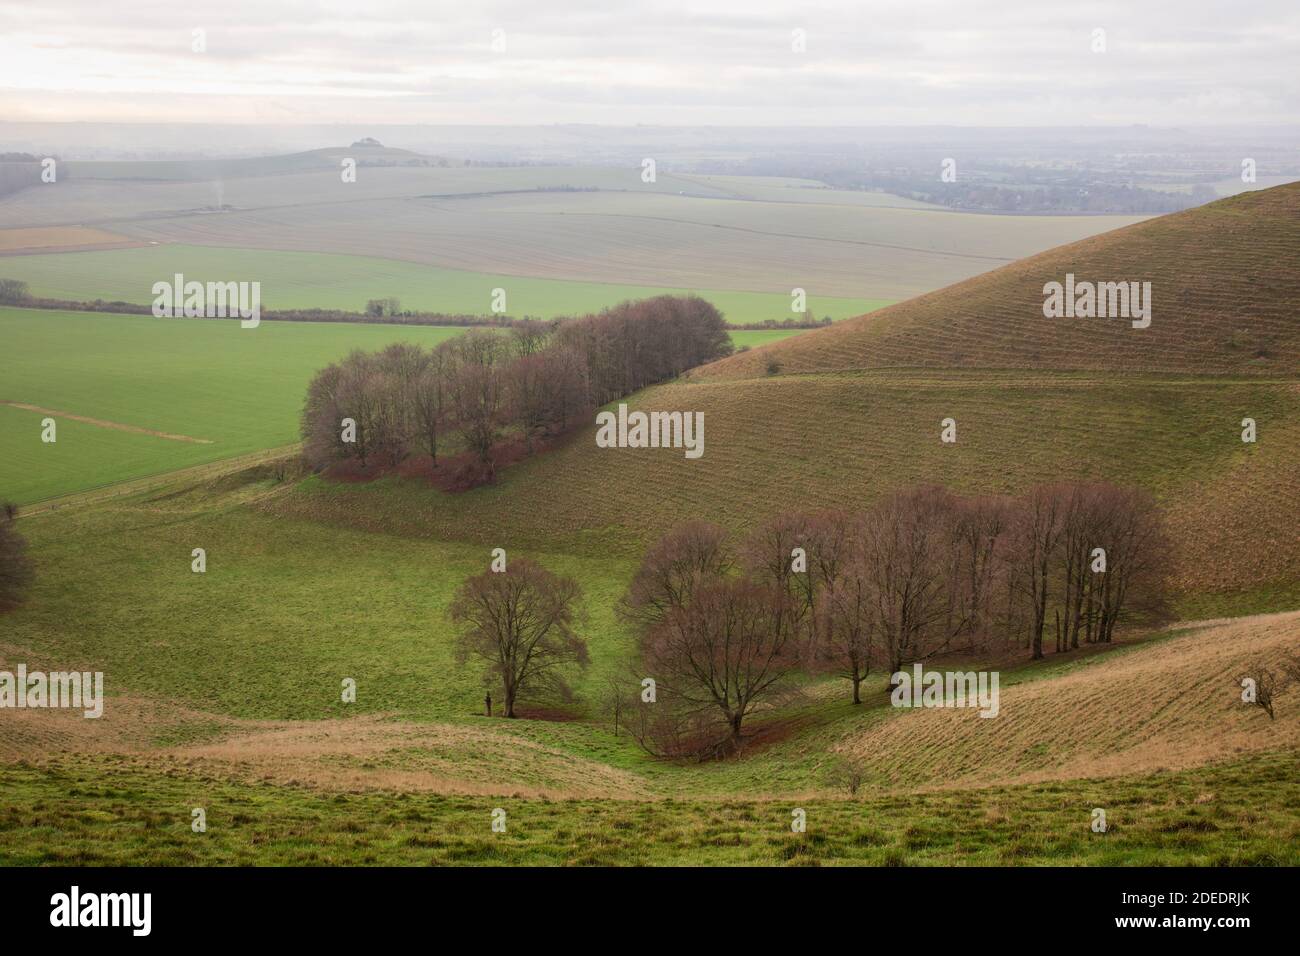 Foggy / Misty November morning on Knap Hill with views of the Vale of Pewsey, Wiltshire, England, UK Stock Photo